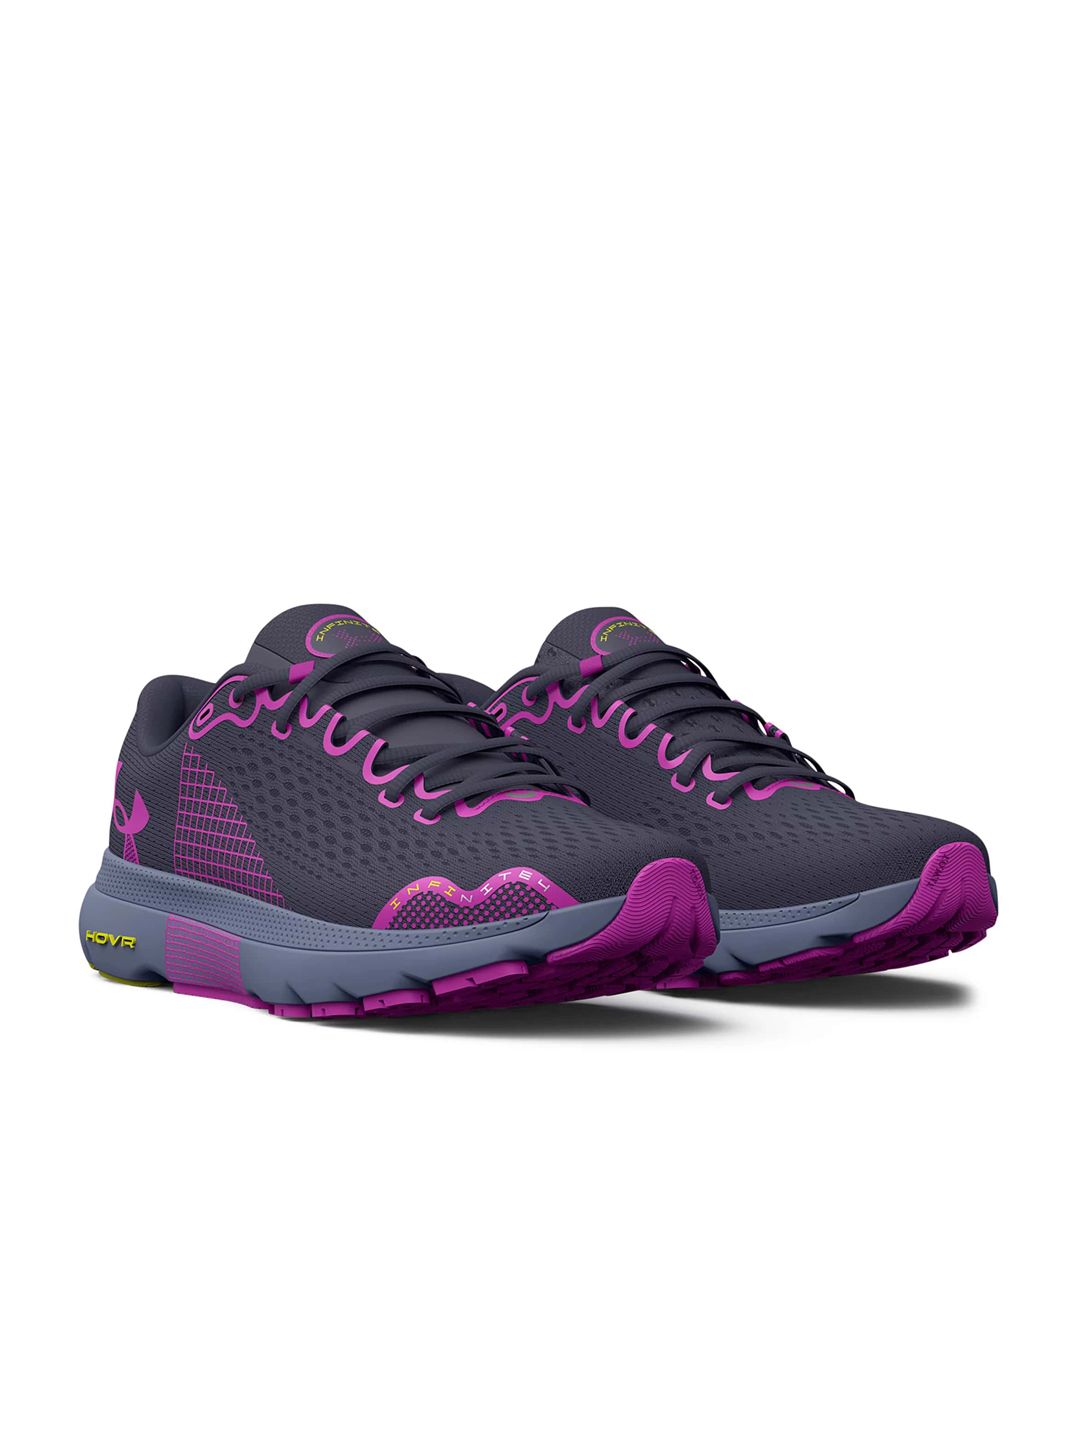 UNDER ARMOUR Women Woven Design HOVR Infinite 4 Running Shoes Price in India